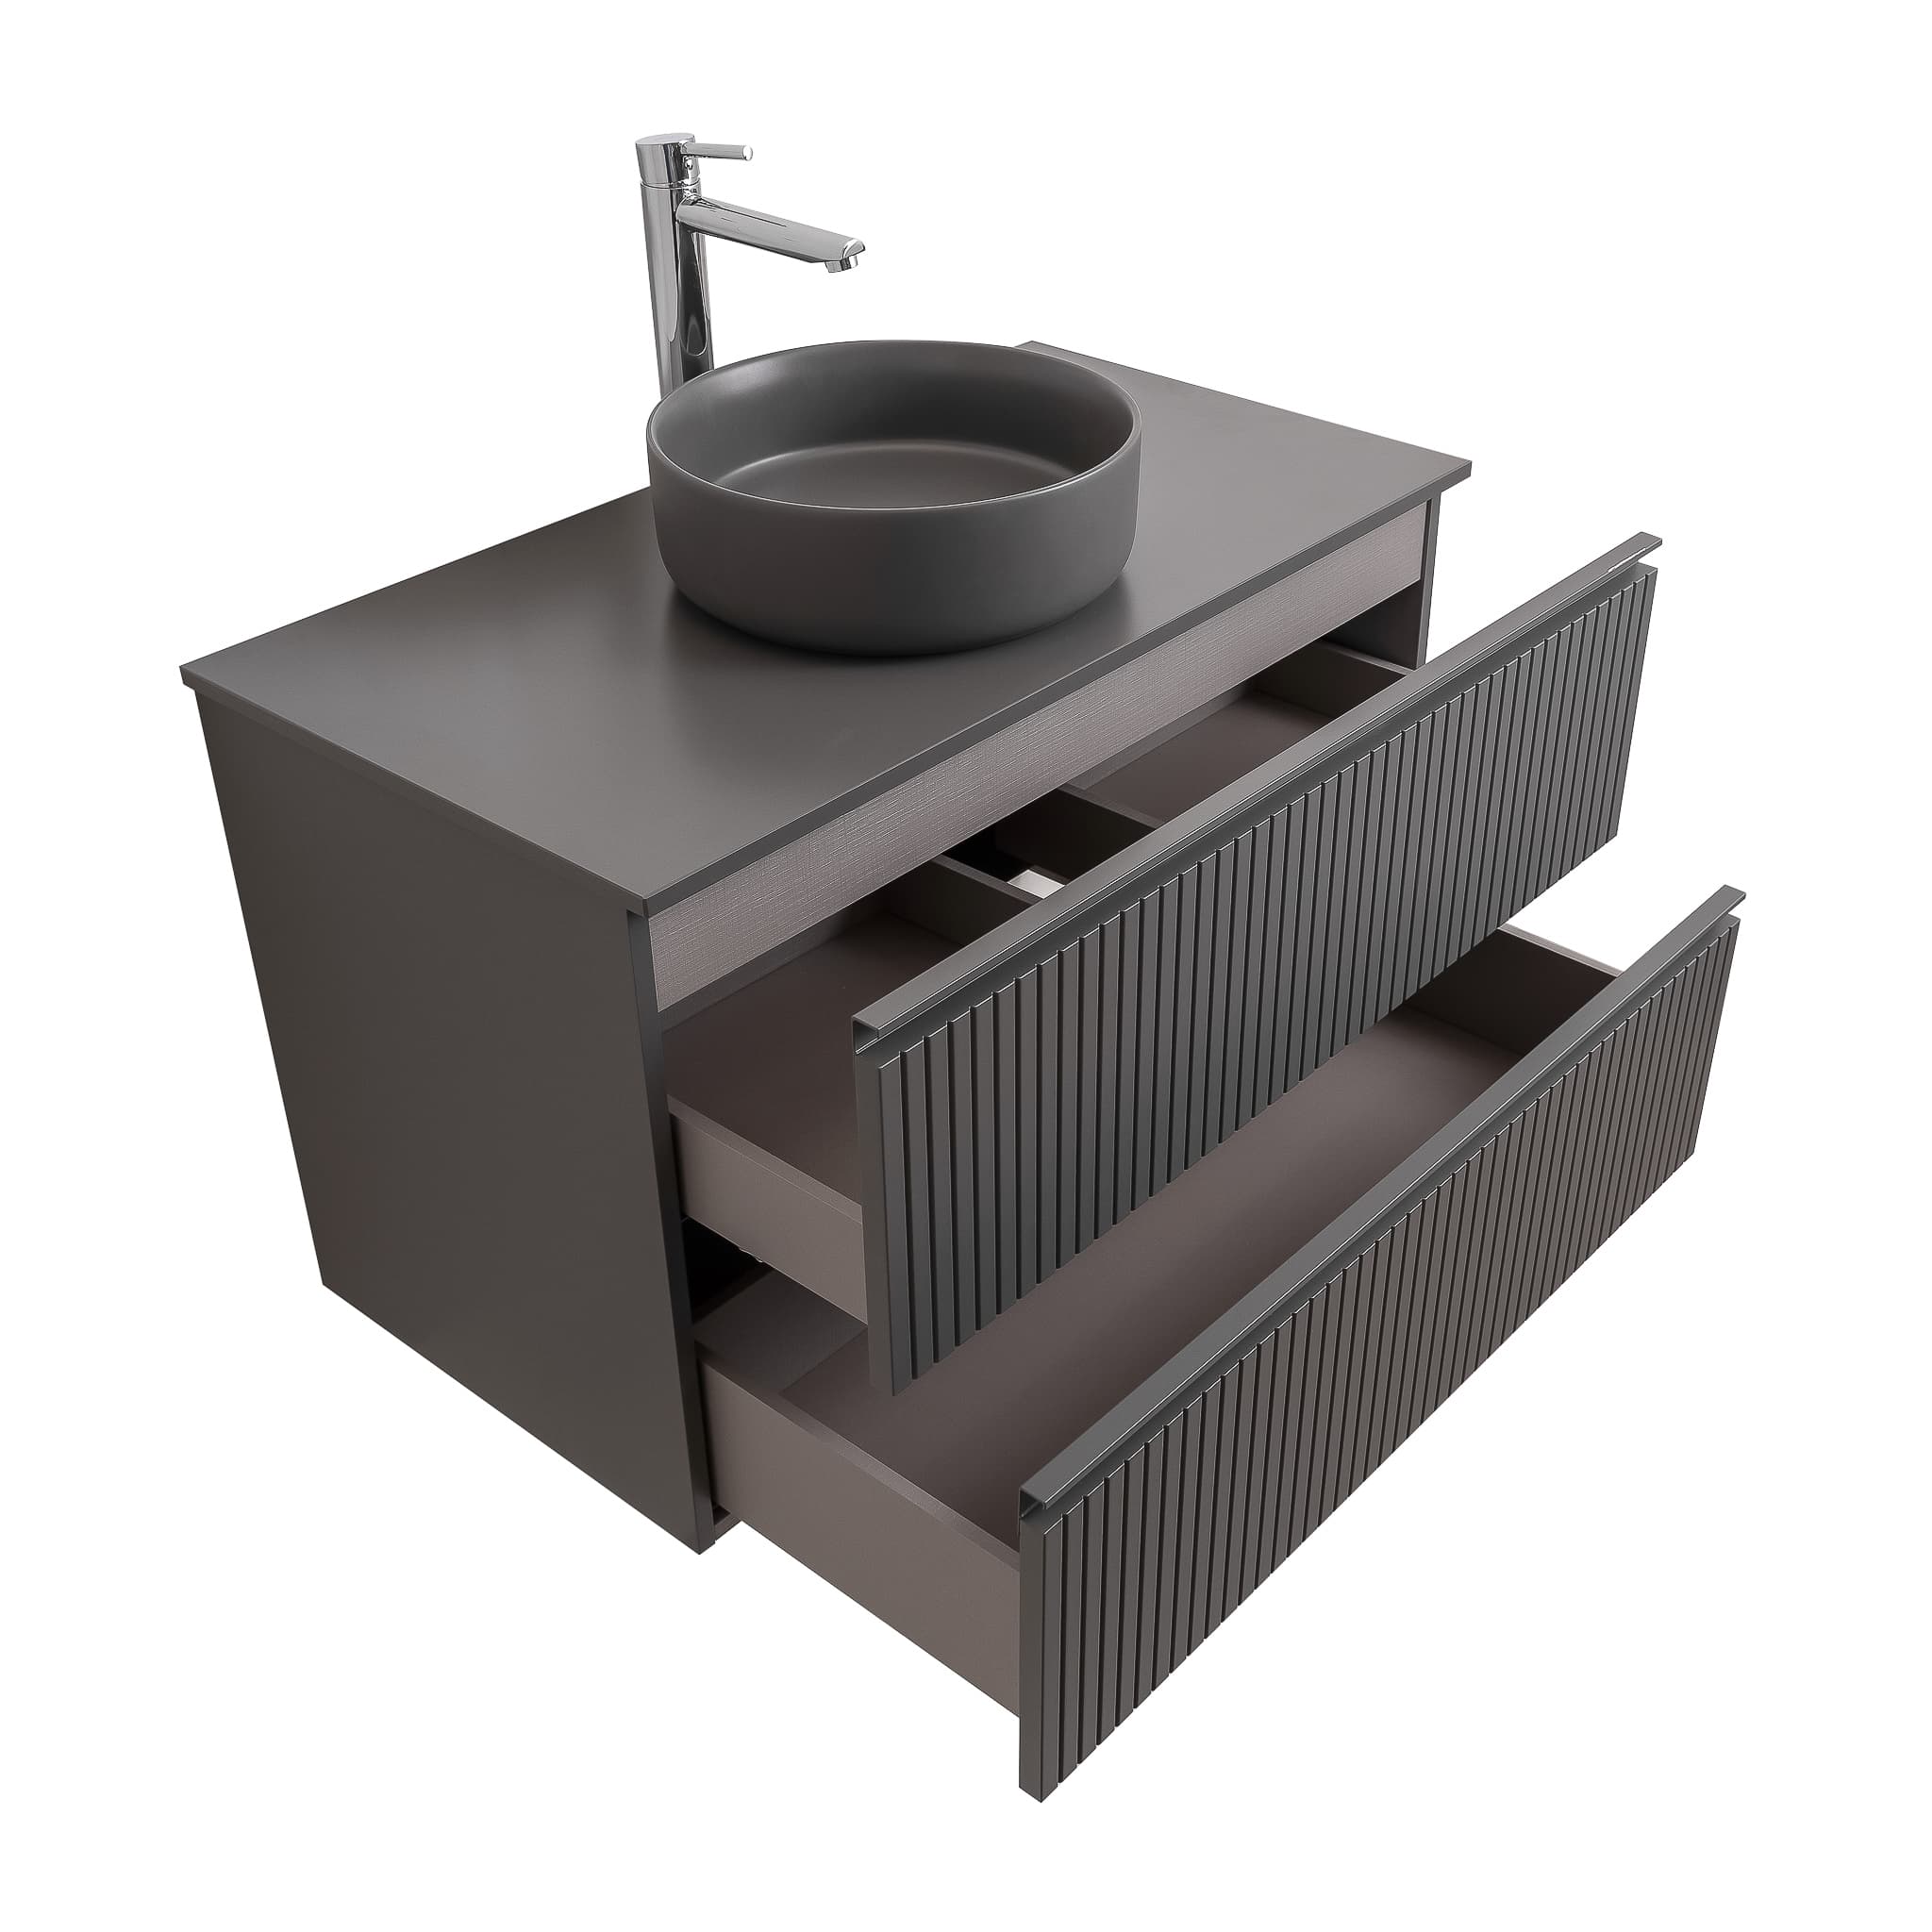 Ares 35.5 Matte Grey Cabinet, Ares Grey Ceniza Top And Ares Grey Ceniza Ceramic Basin, Wall Mounted Modern Vanity Set